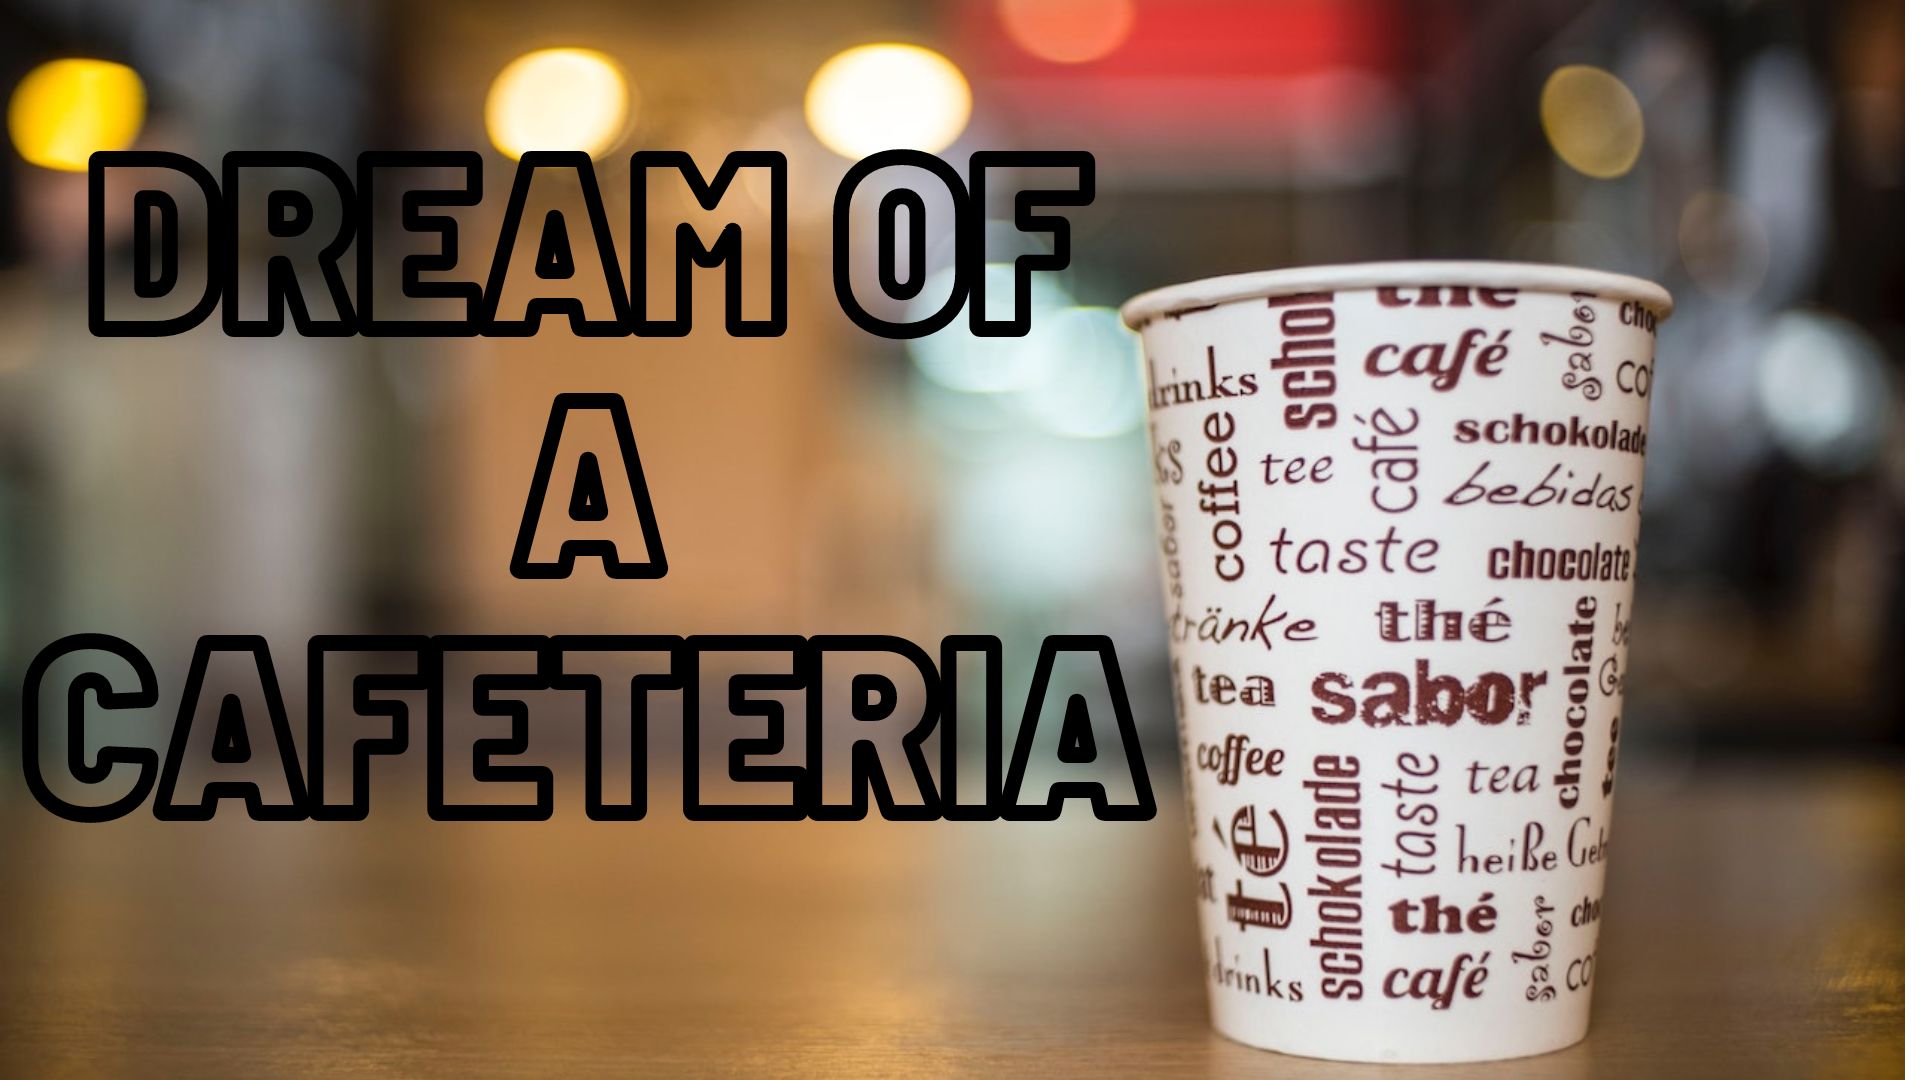 Dream Of A Cafeteria - You Are Trying To Steer Your Friends